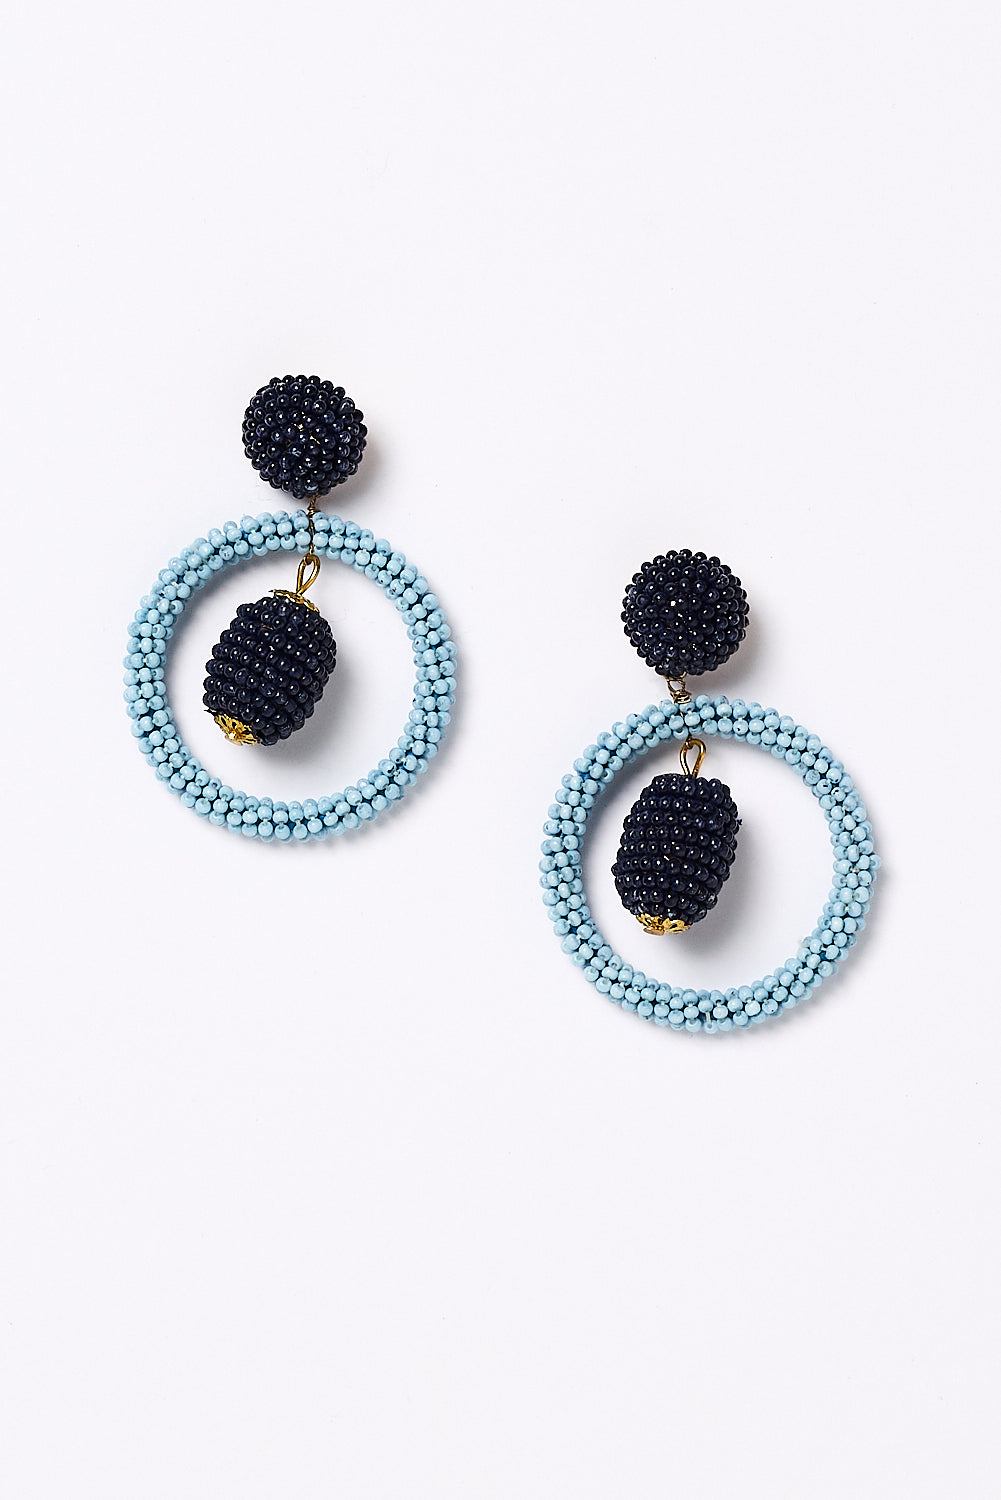 Double Drop Beaded Earrings in Navy and Light Blue